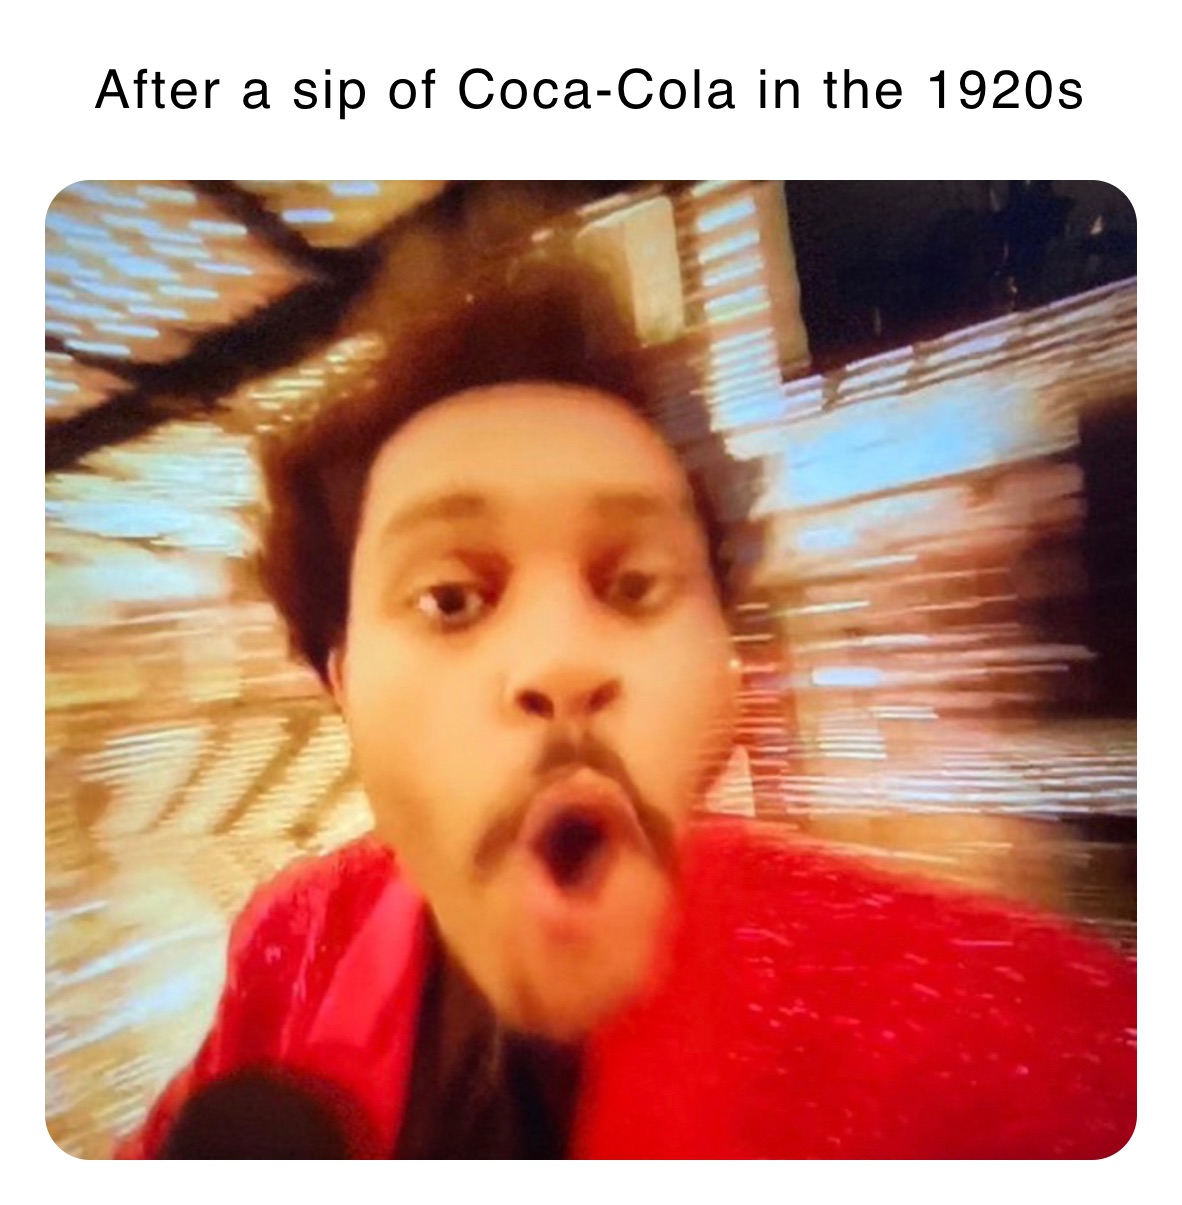 After a sip of Coca-Cola in the 1920s